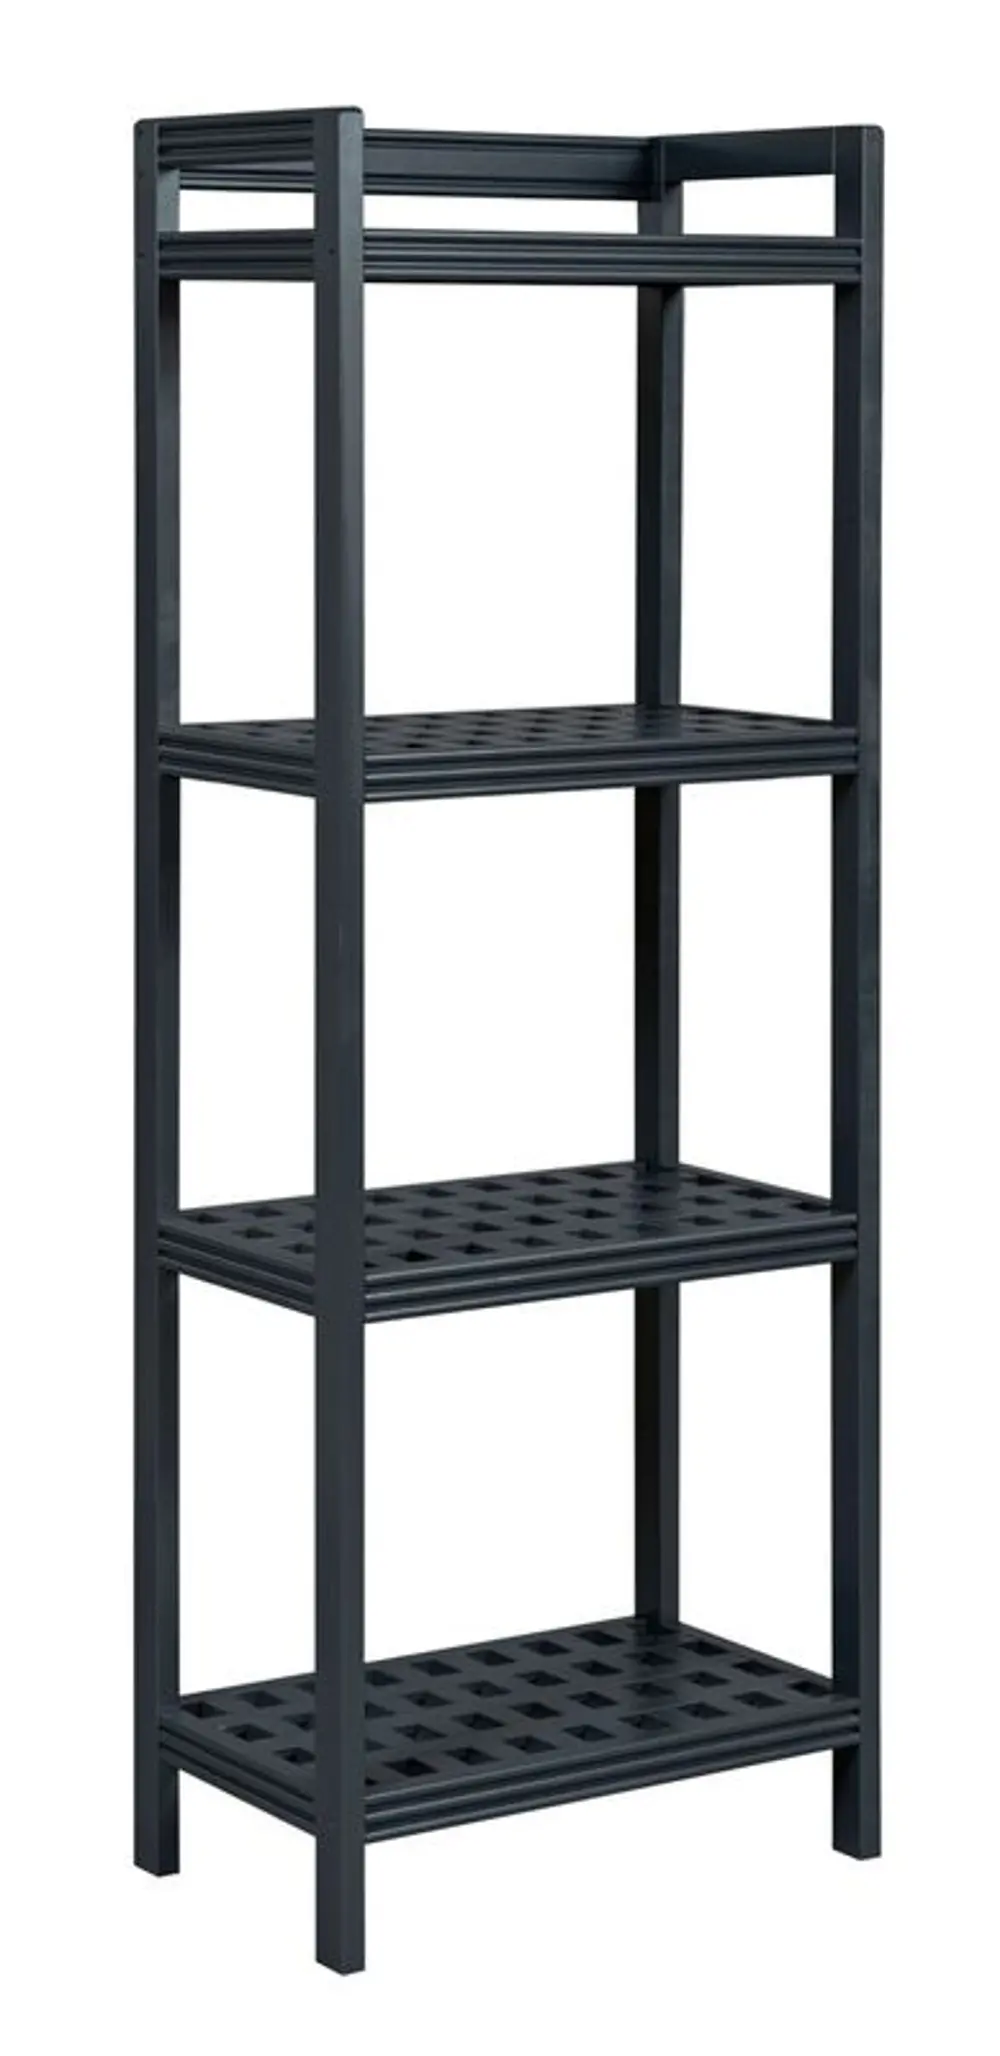 Graphite Gray Tall Bookcase/Media Tower - Beaumont-1